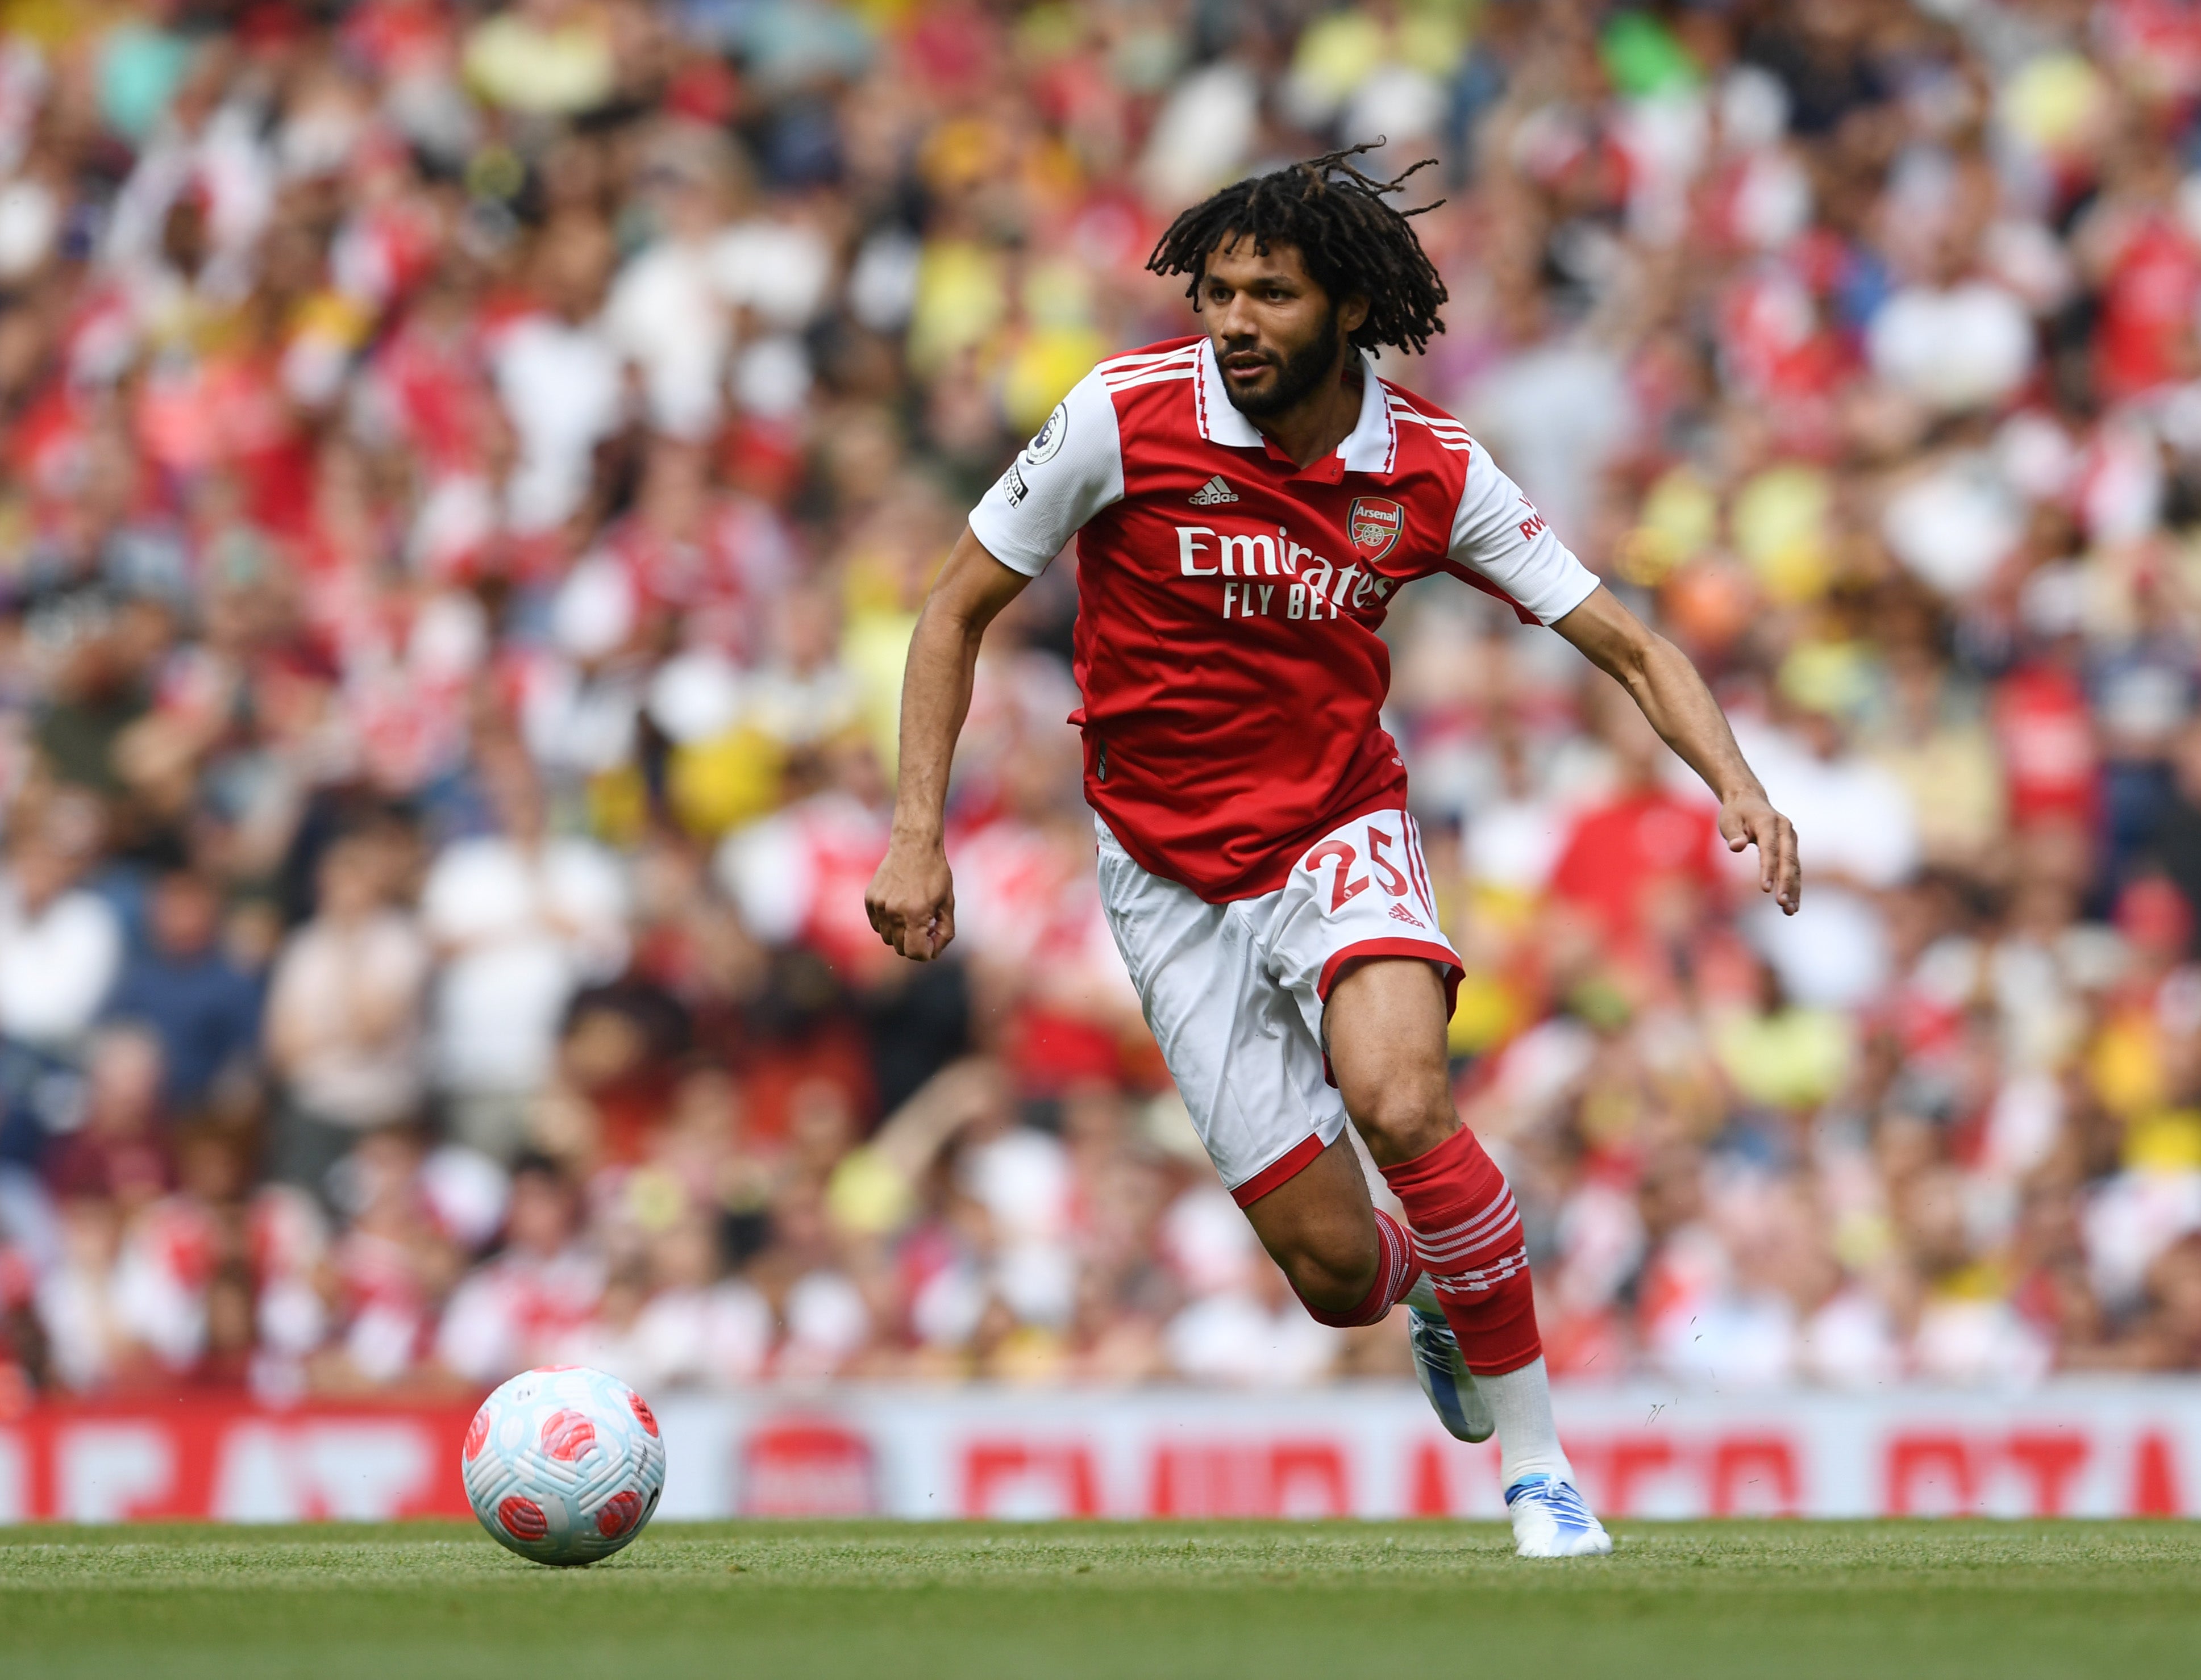 The midfielder has scored five goals in 147 appearances for the Gunners